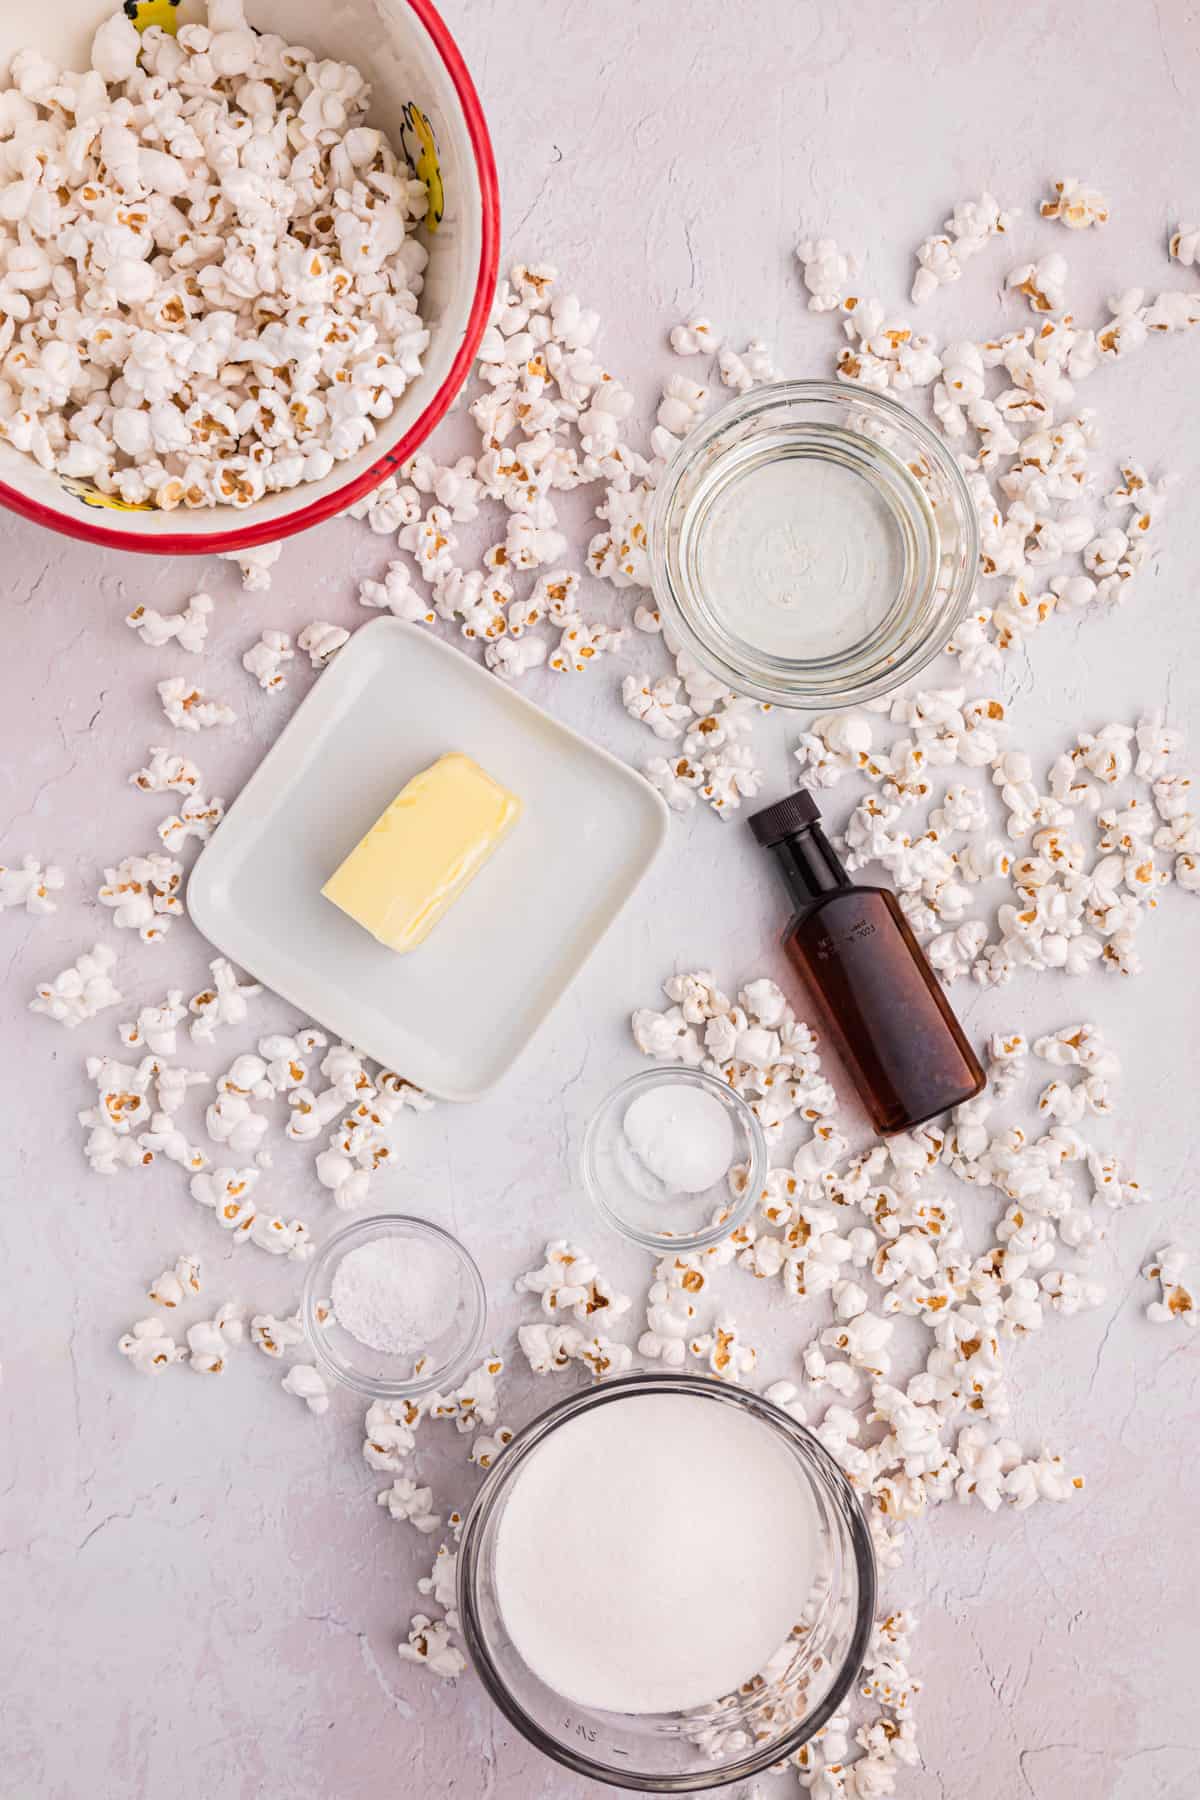 Popcorn is spread around several other ingredients on a white surface.